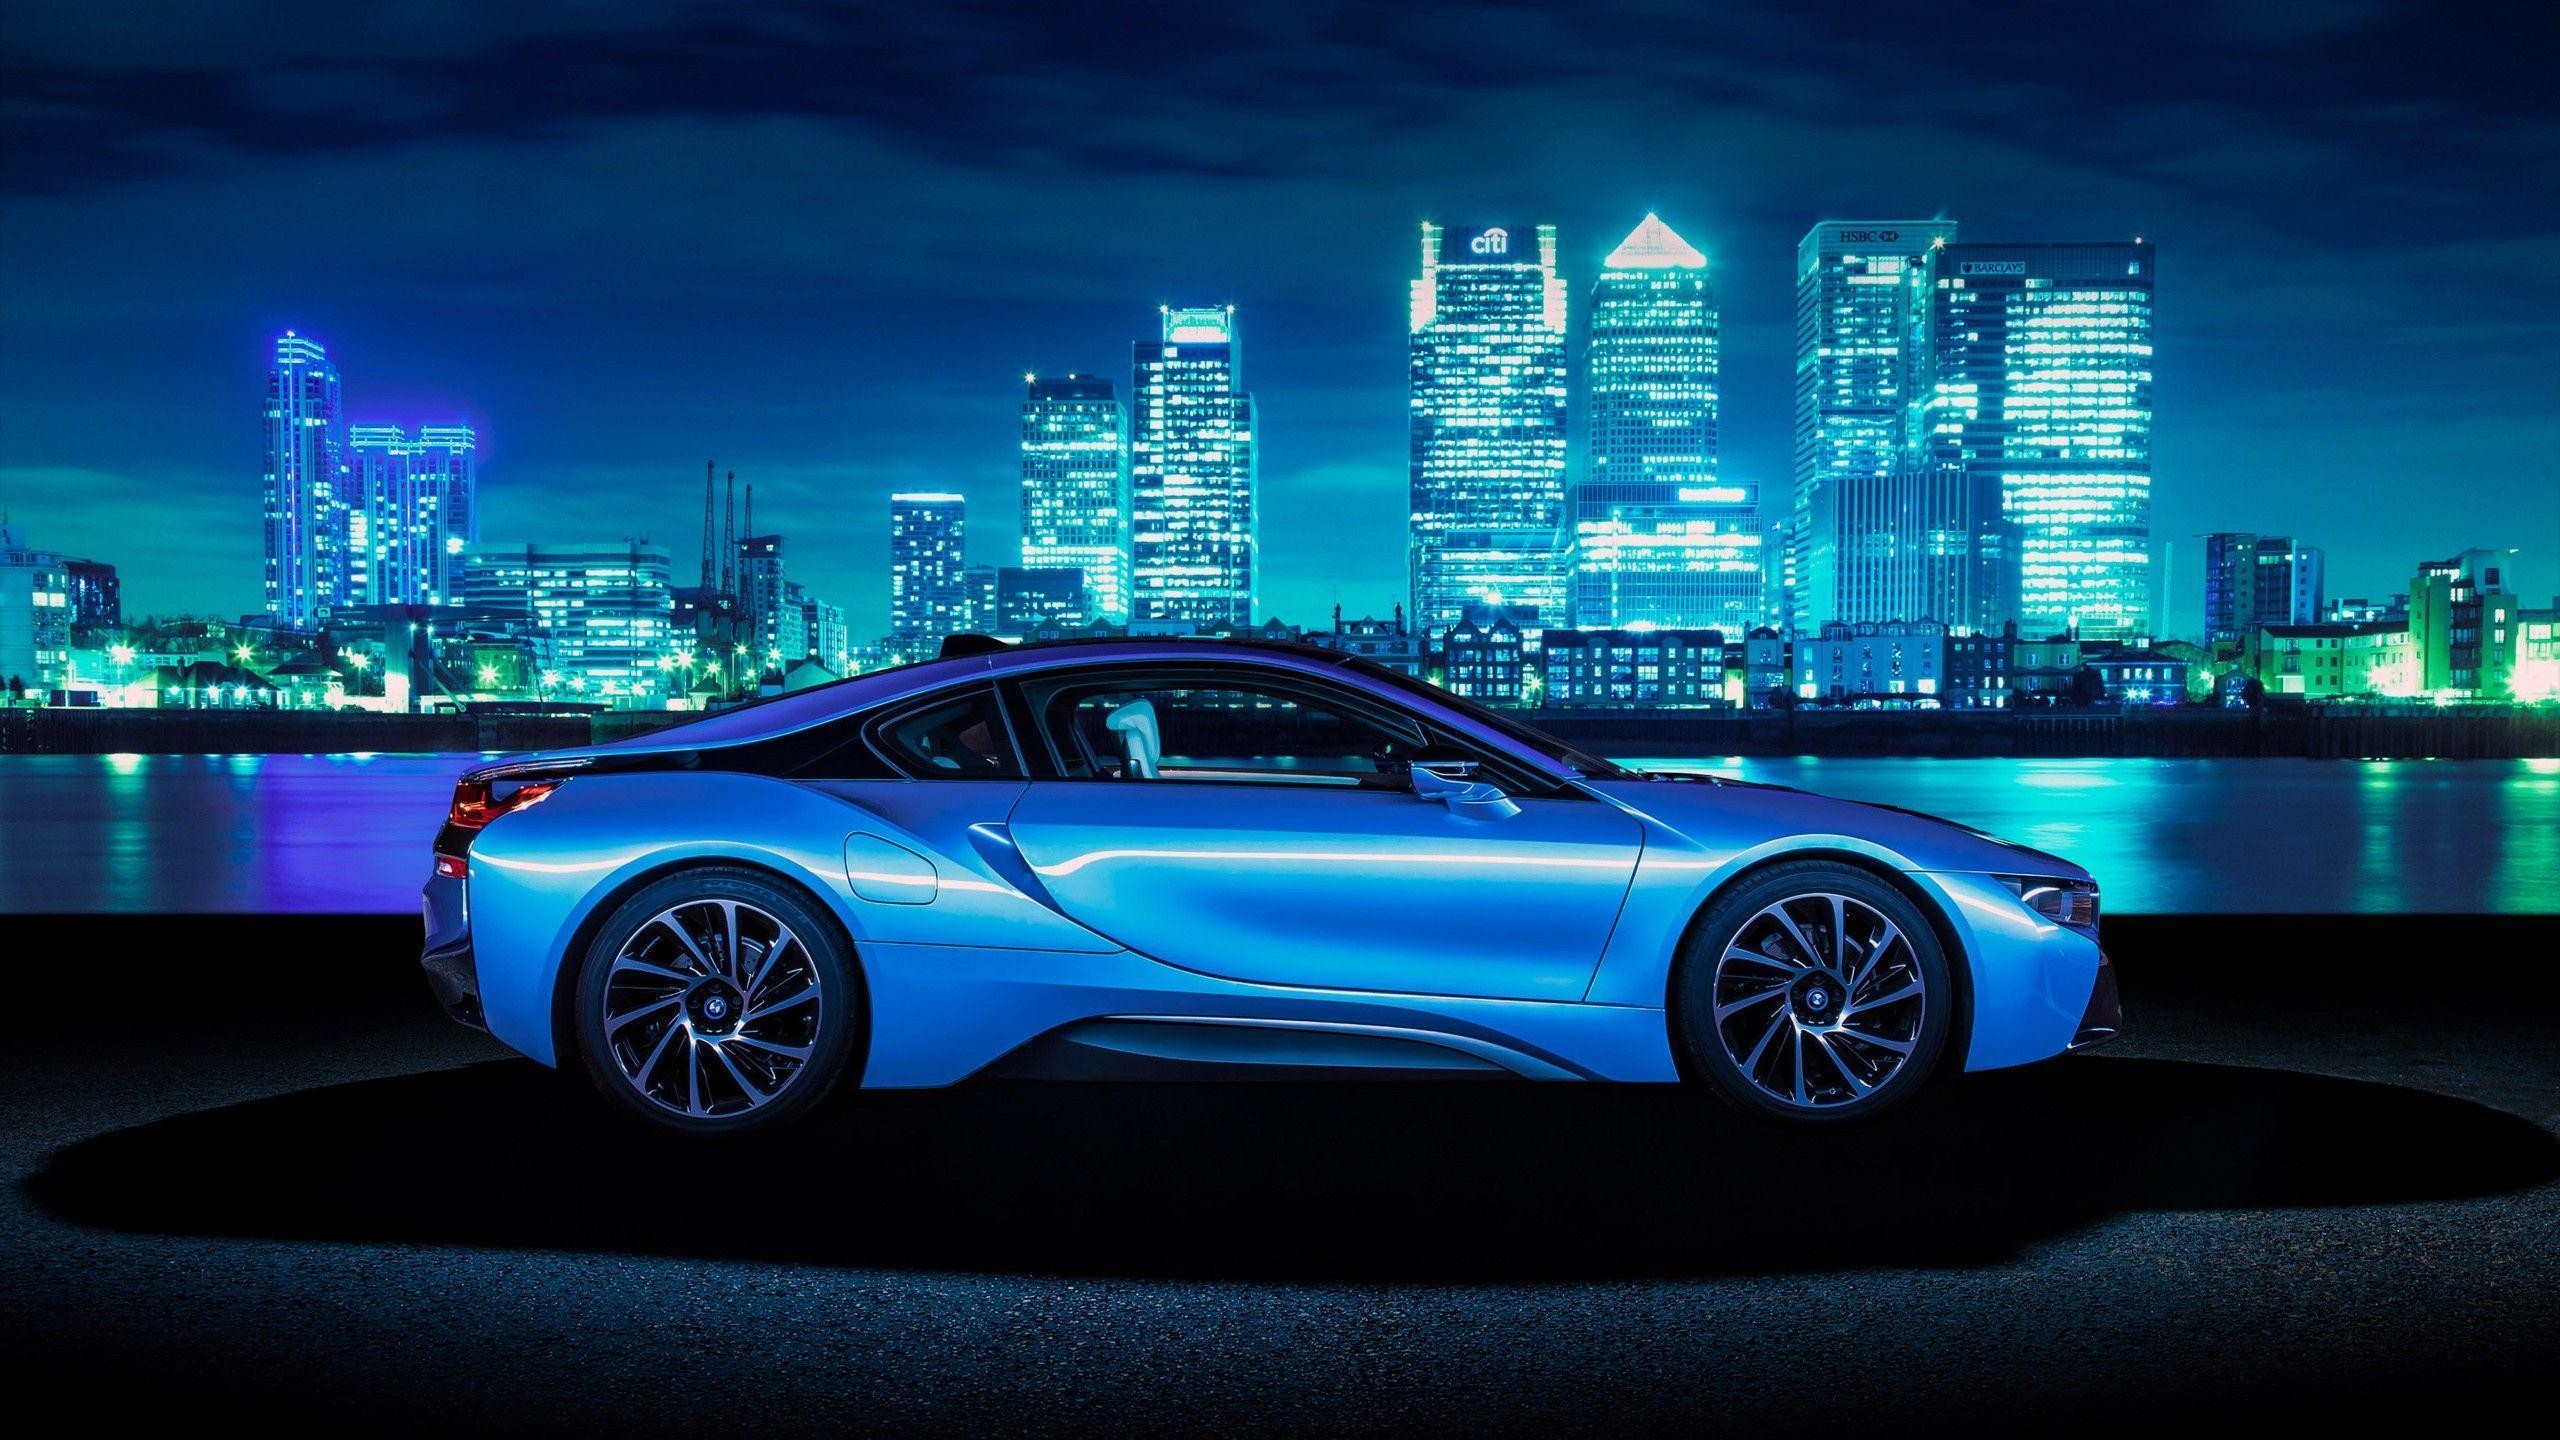 2560x1440 BMW, Luxury Cars, Car Wallpapers HD / Desktop and Mobile Backgrounds